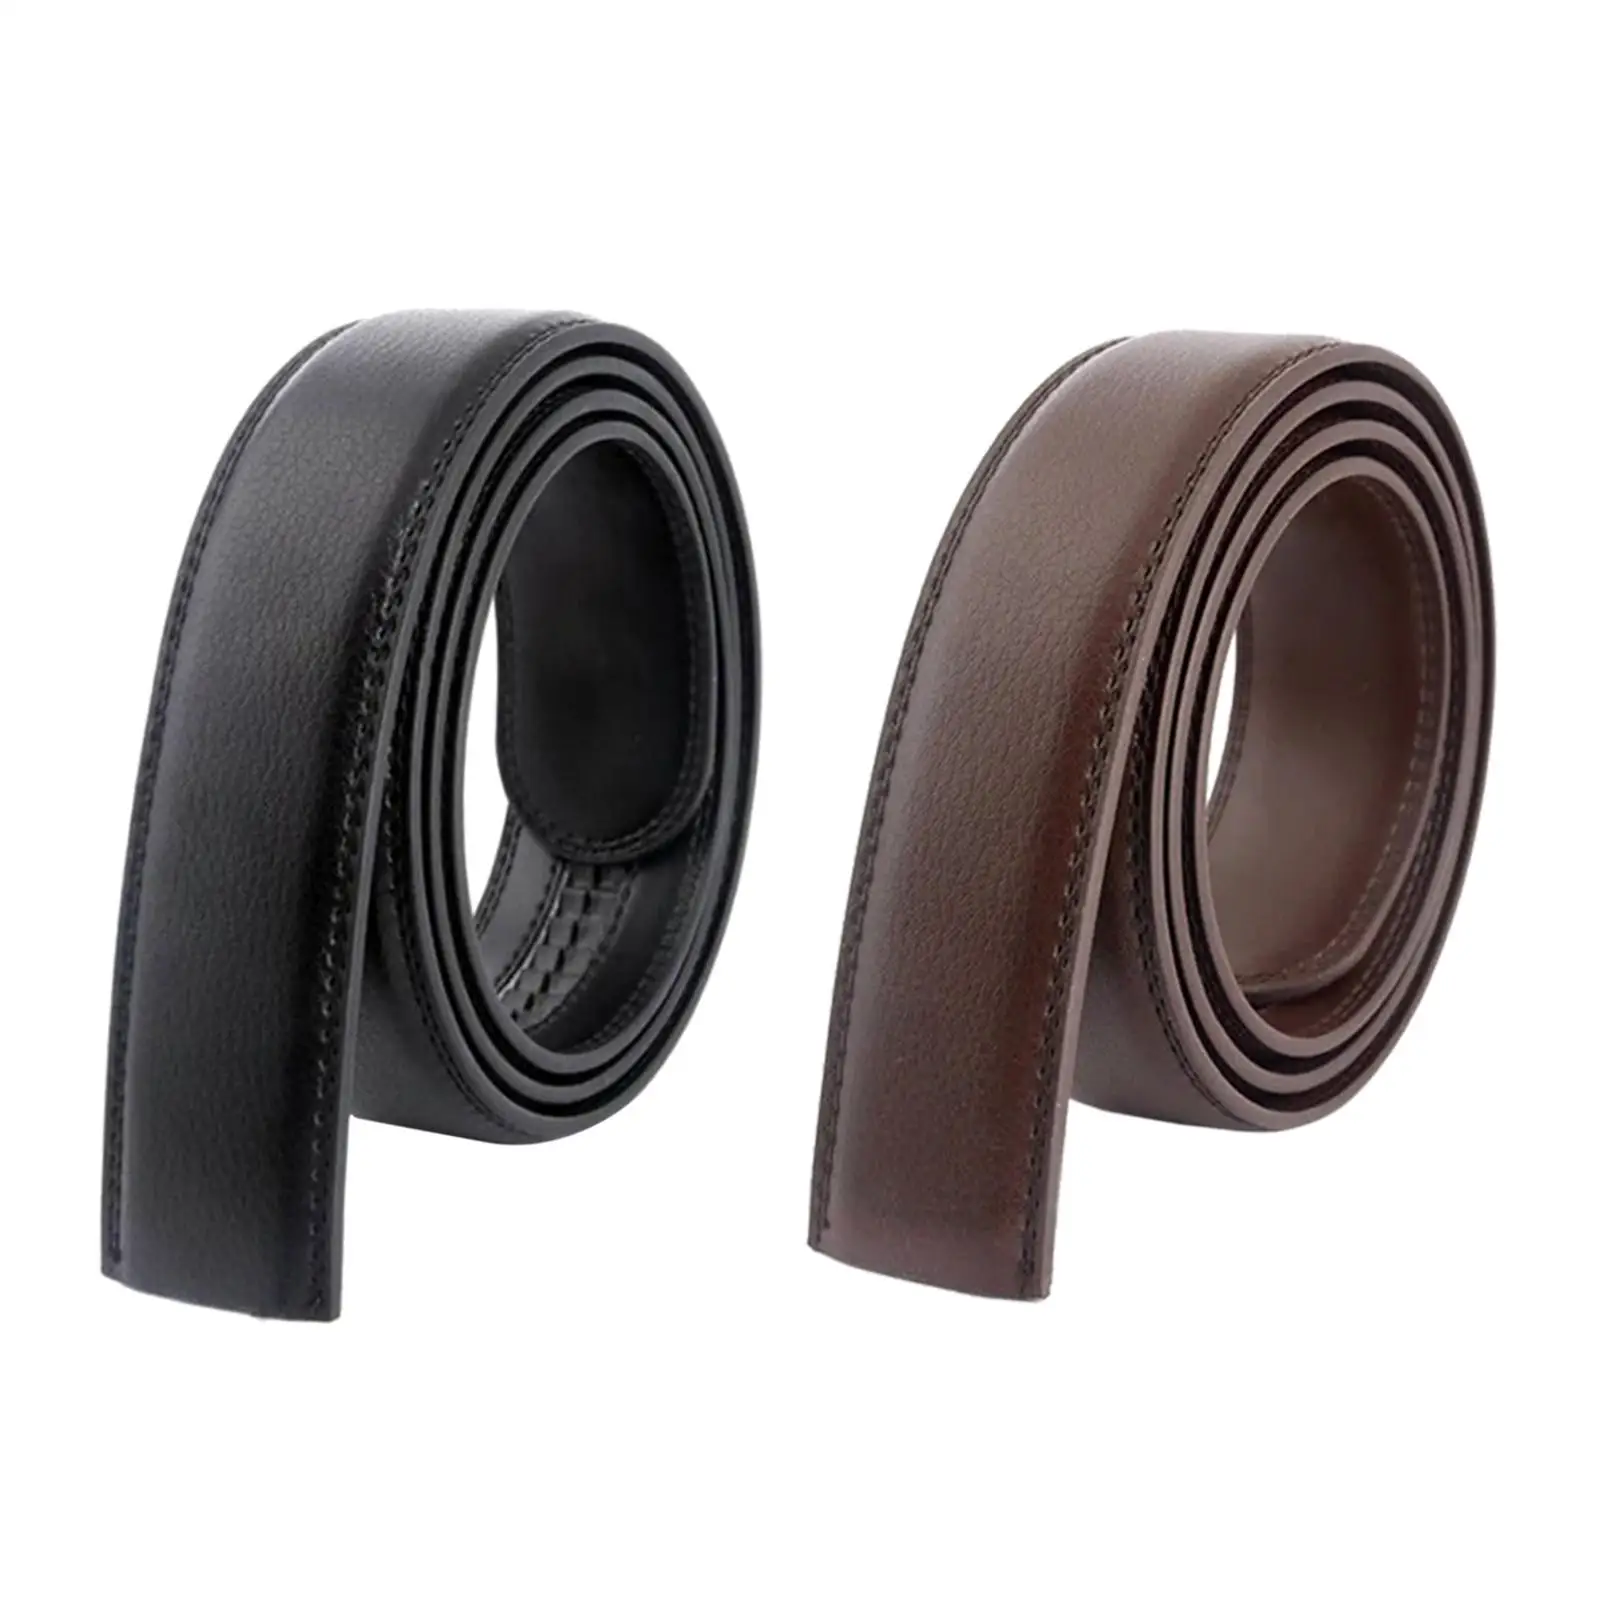 Casual Leather Belt No Holes Replacement 3.5cm Wide Waist Strap Belt Strap for Jeans Clothing Pants Automatic Ratchet Buckles